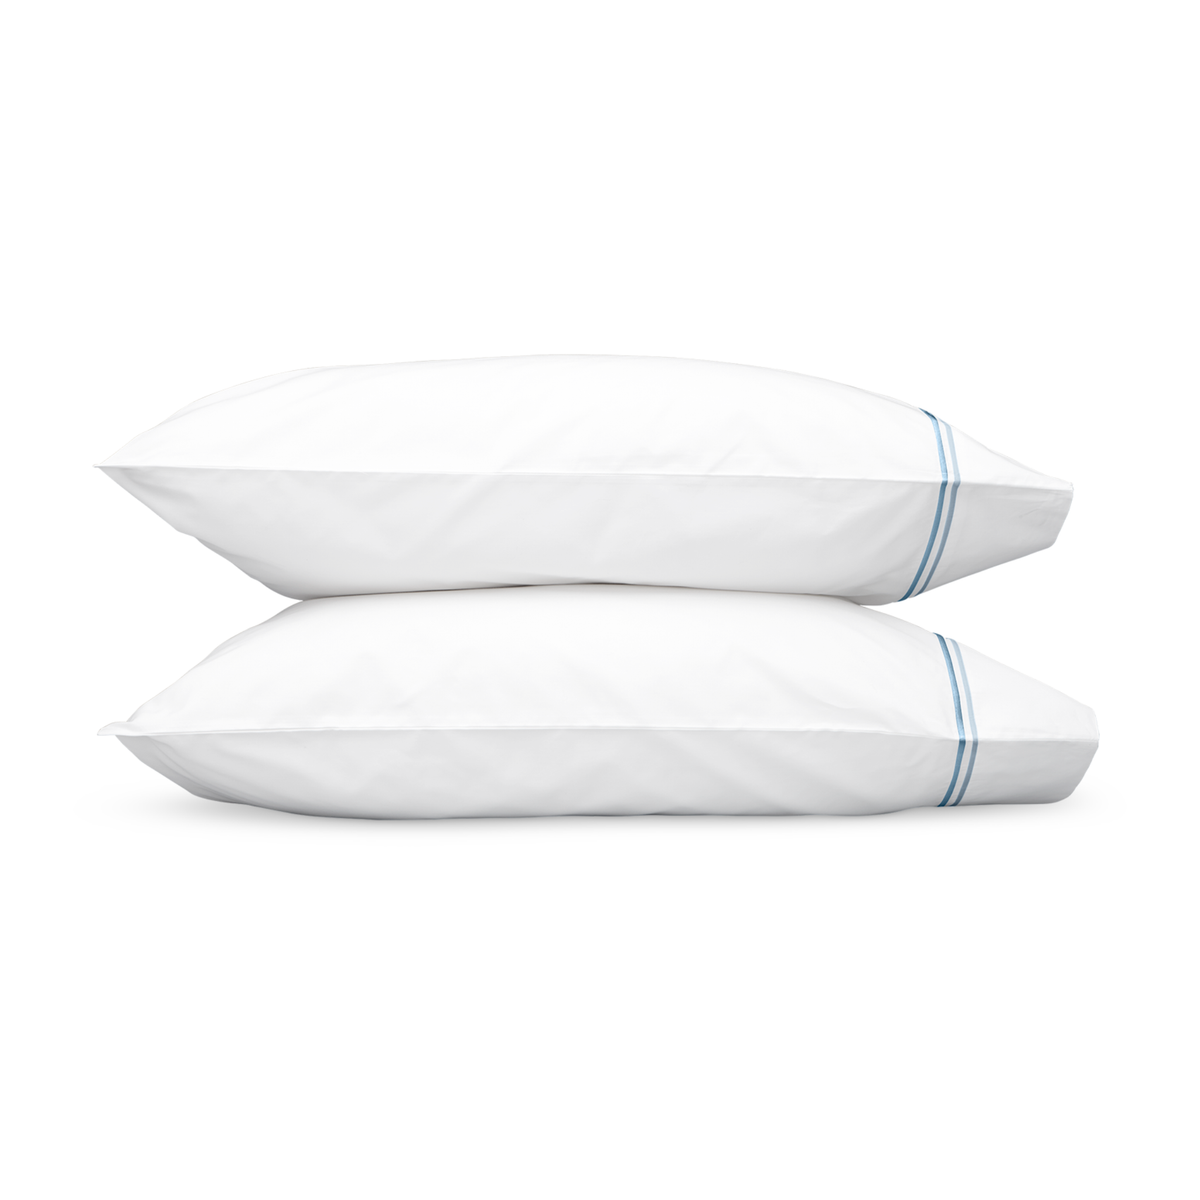 Pair of Pillowcases of Matouk Essex Bedding Collection in Lightblue Color